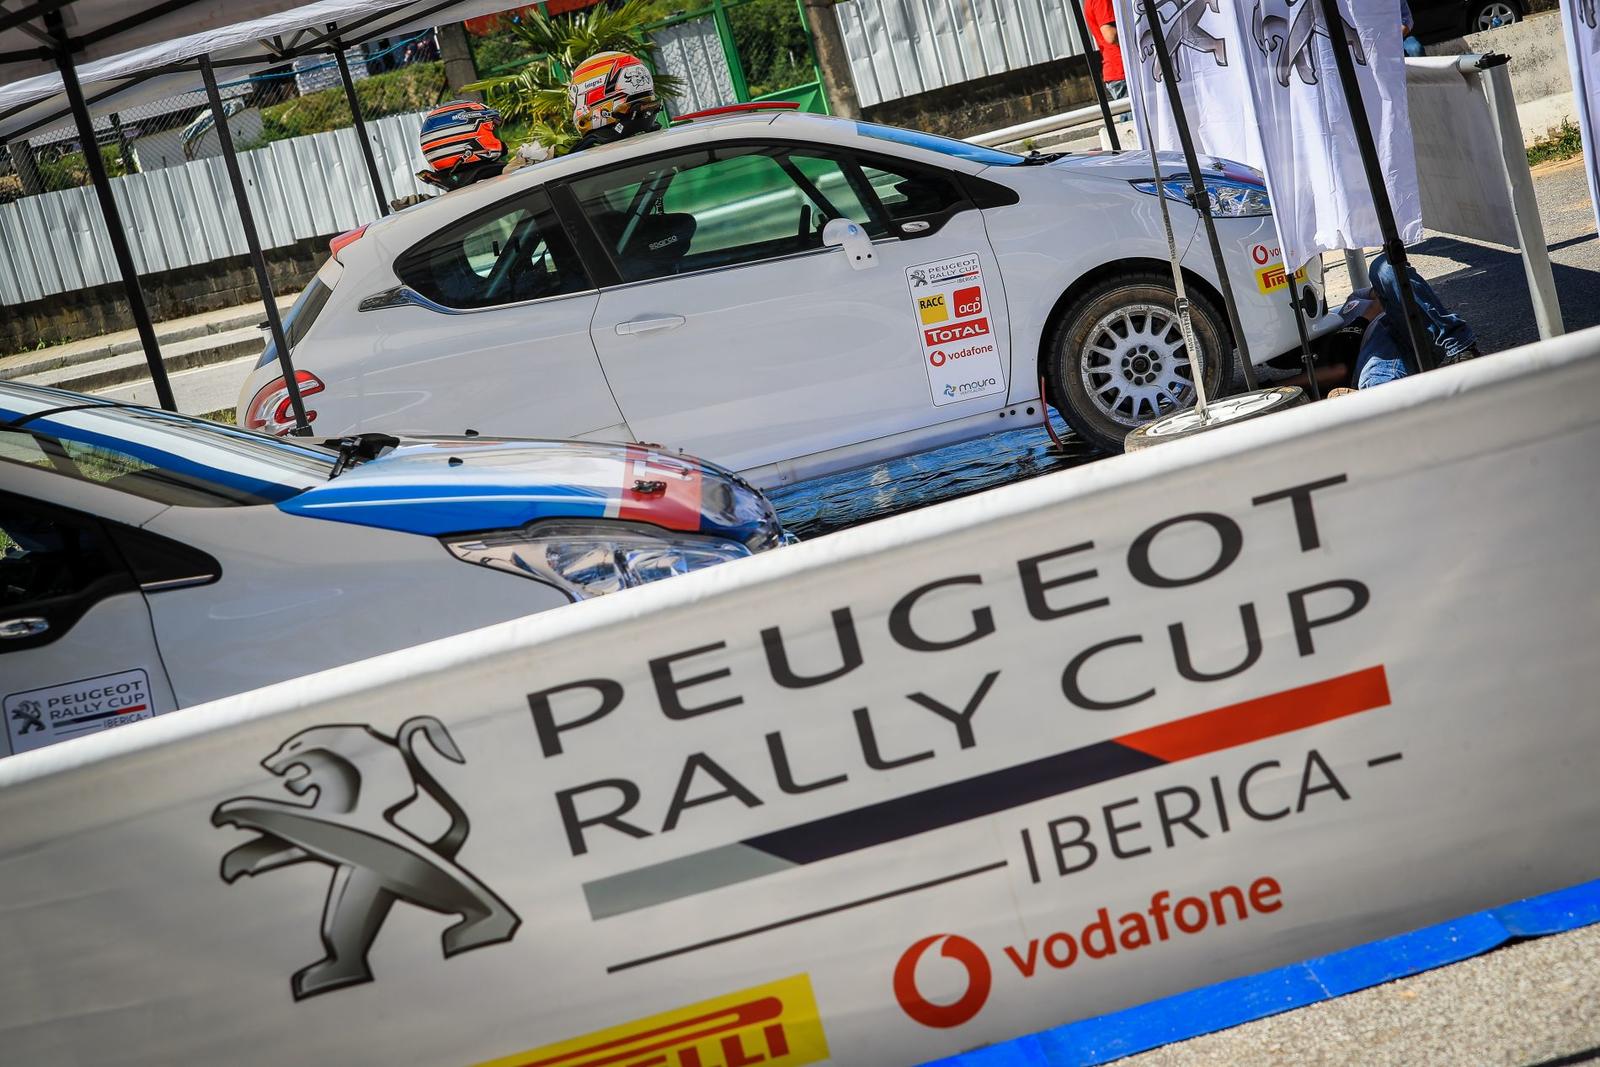 Peugeot Rally Cup Iberica co-drive 2019 (13)